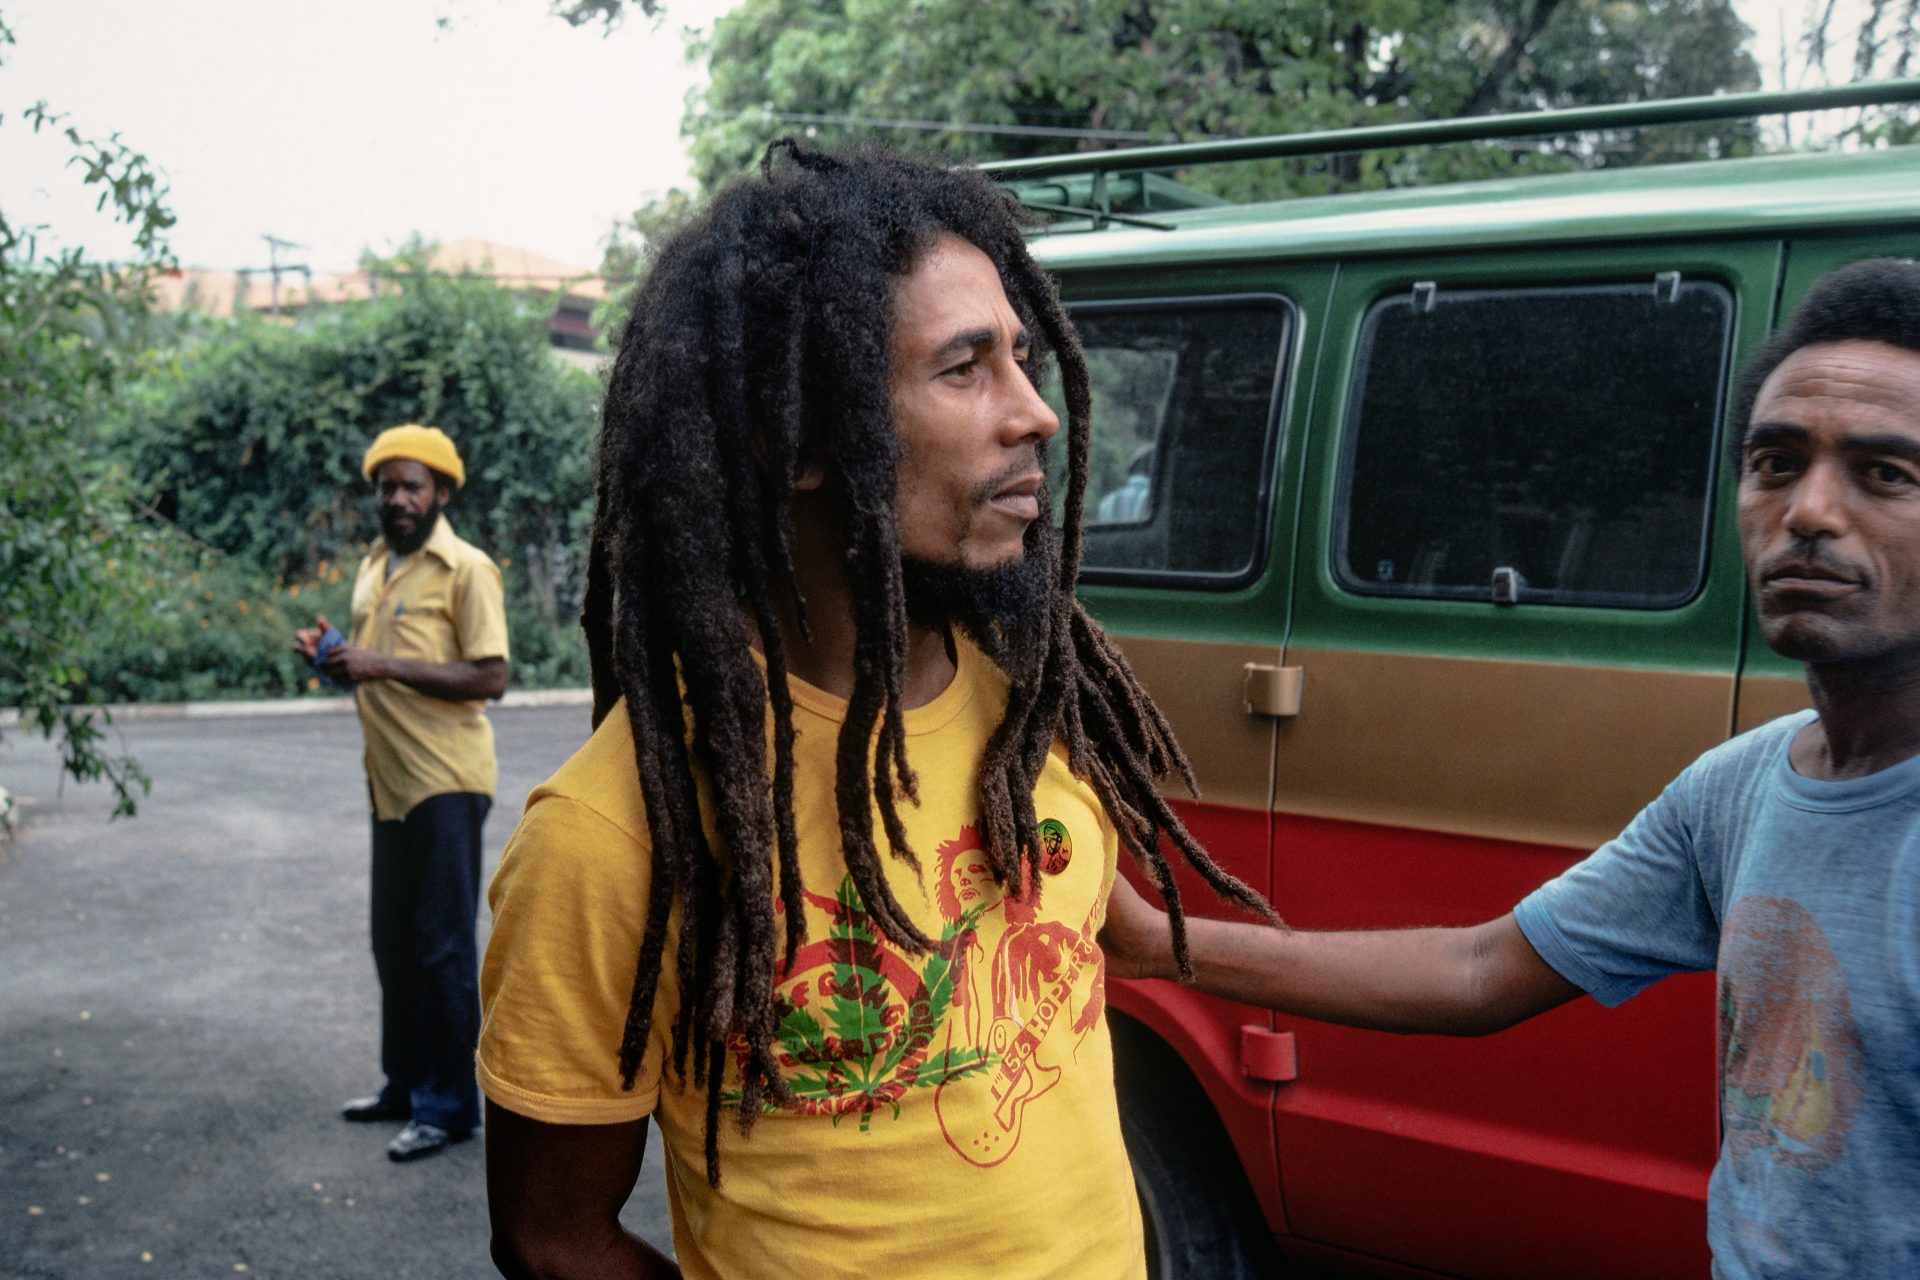 Bob Marley played every day, no matter where he was